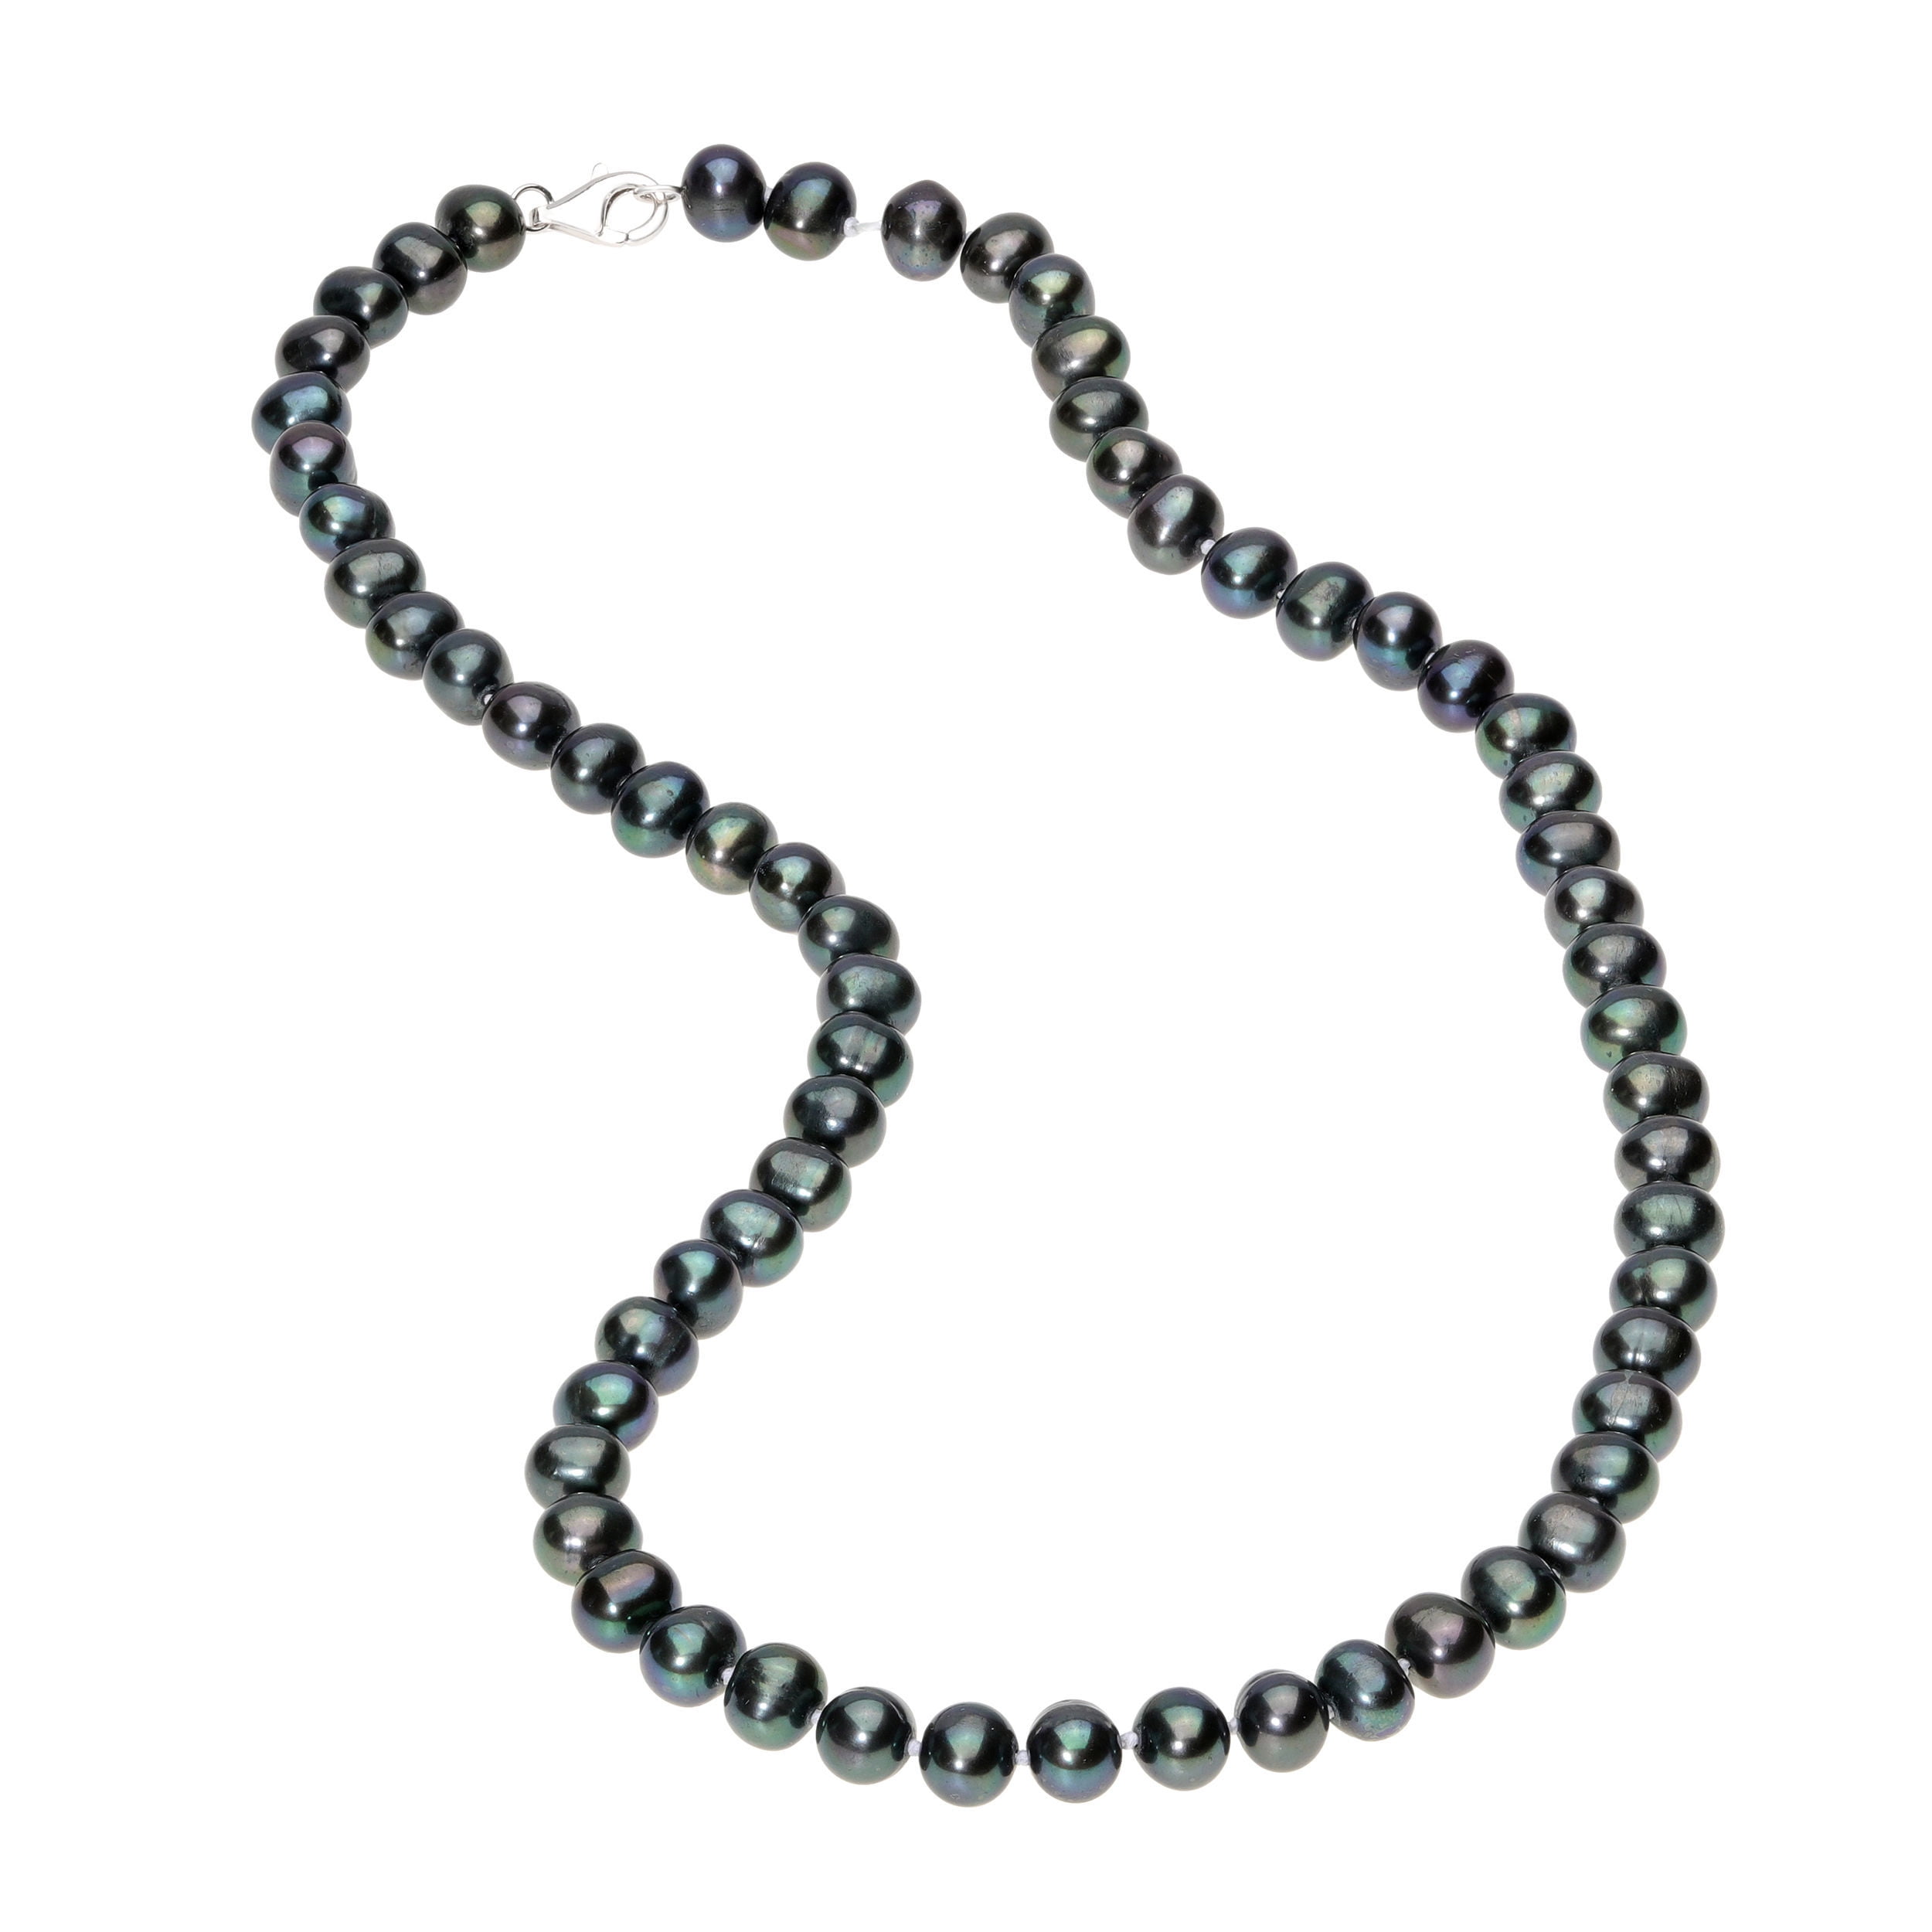 6-7MM Sterling Silver and Black Pearl Necklace 20